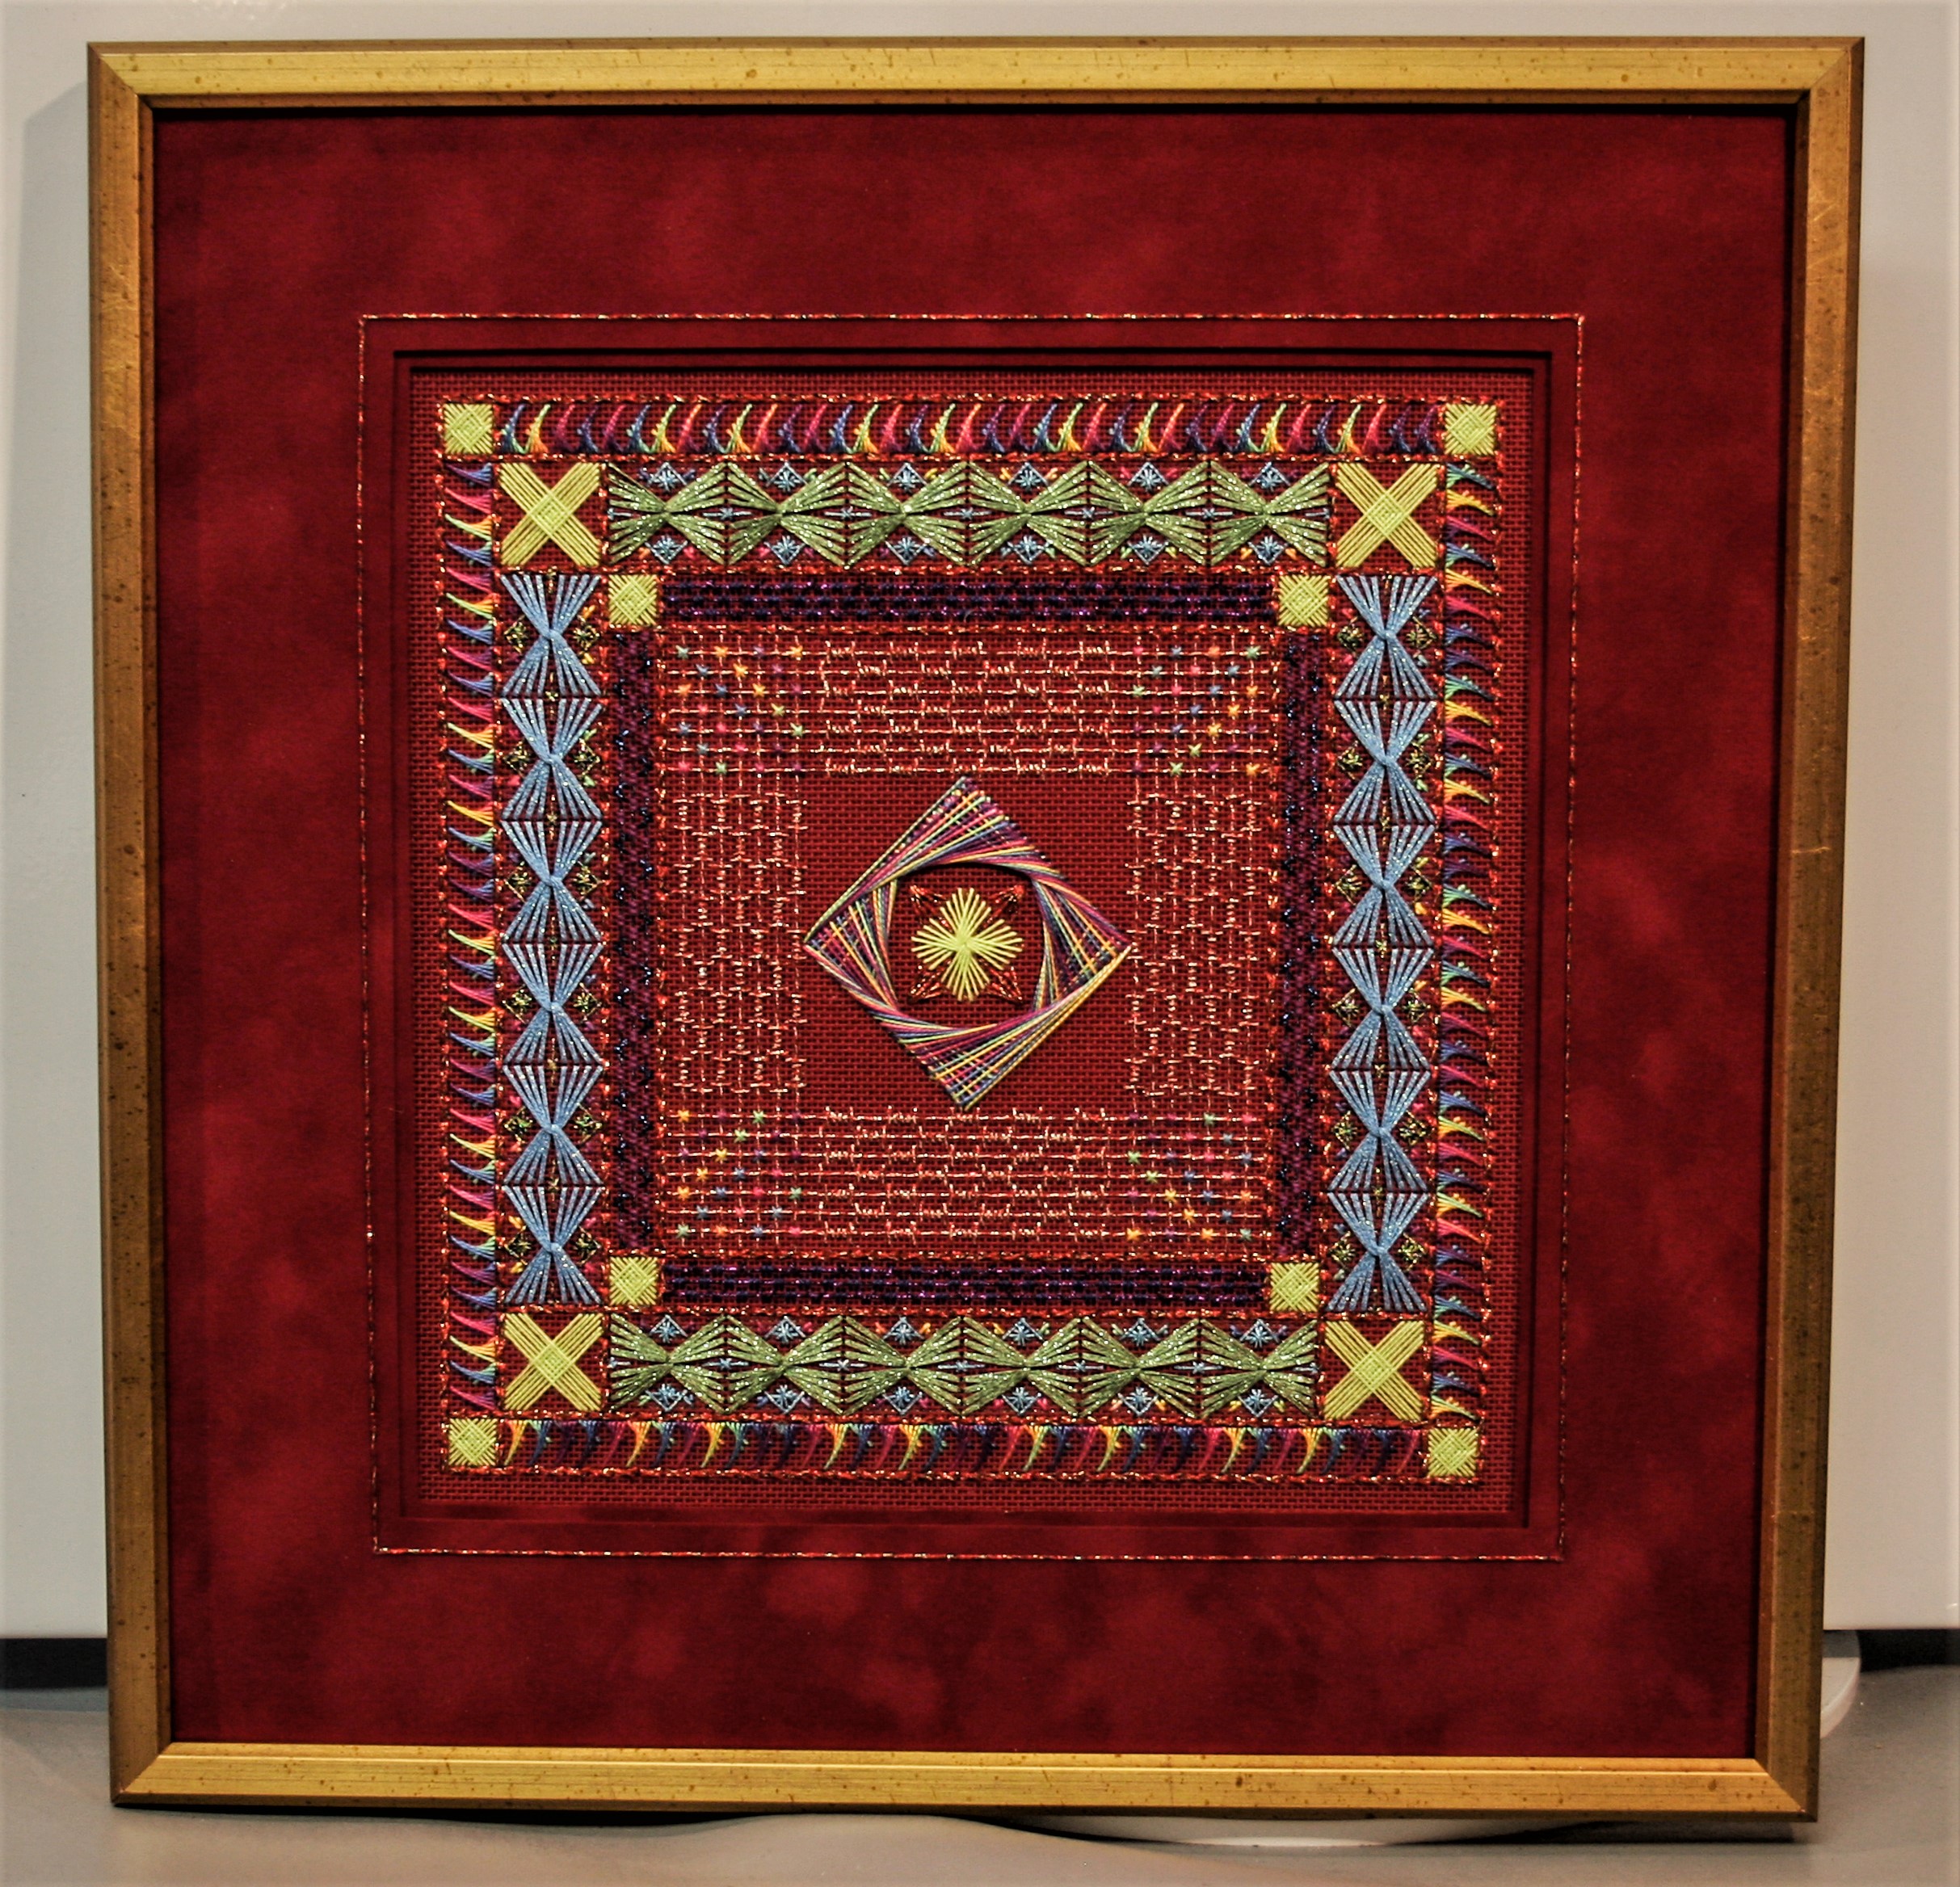 Framed specialty stitch needlepoint with gold line and velvet embellished mat